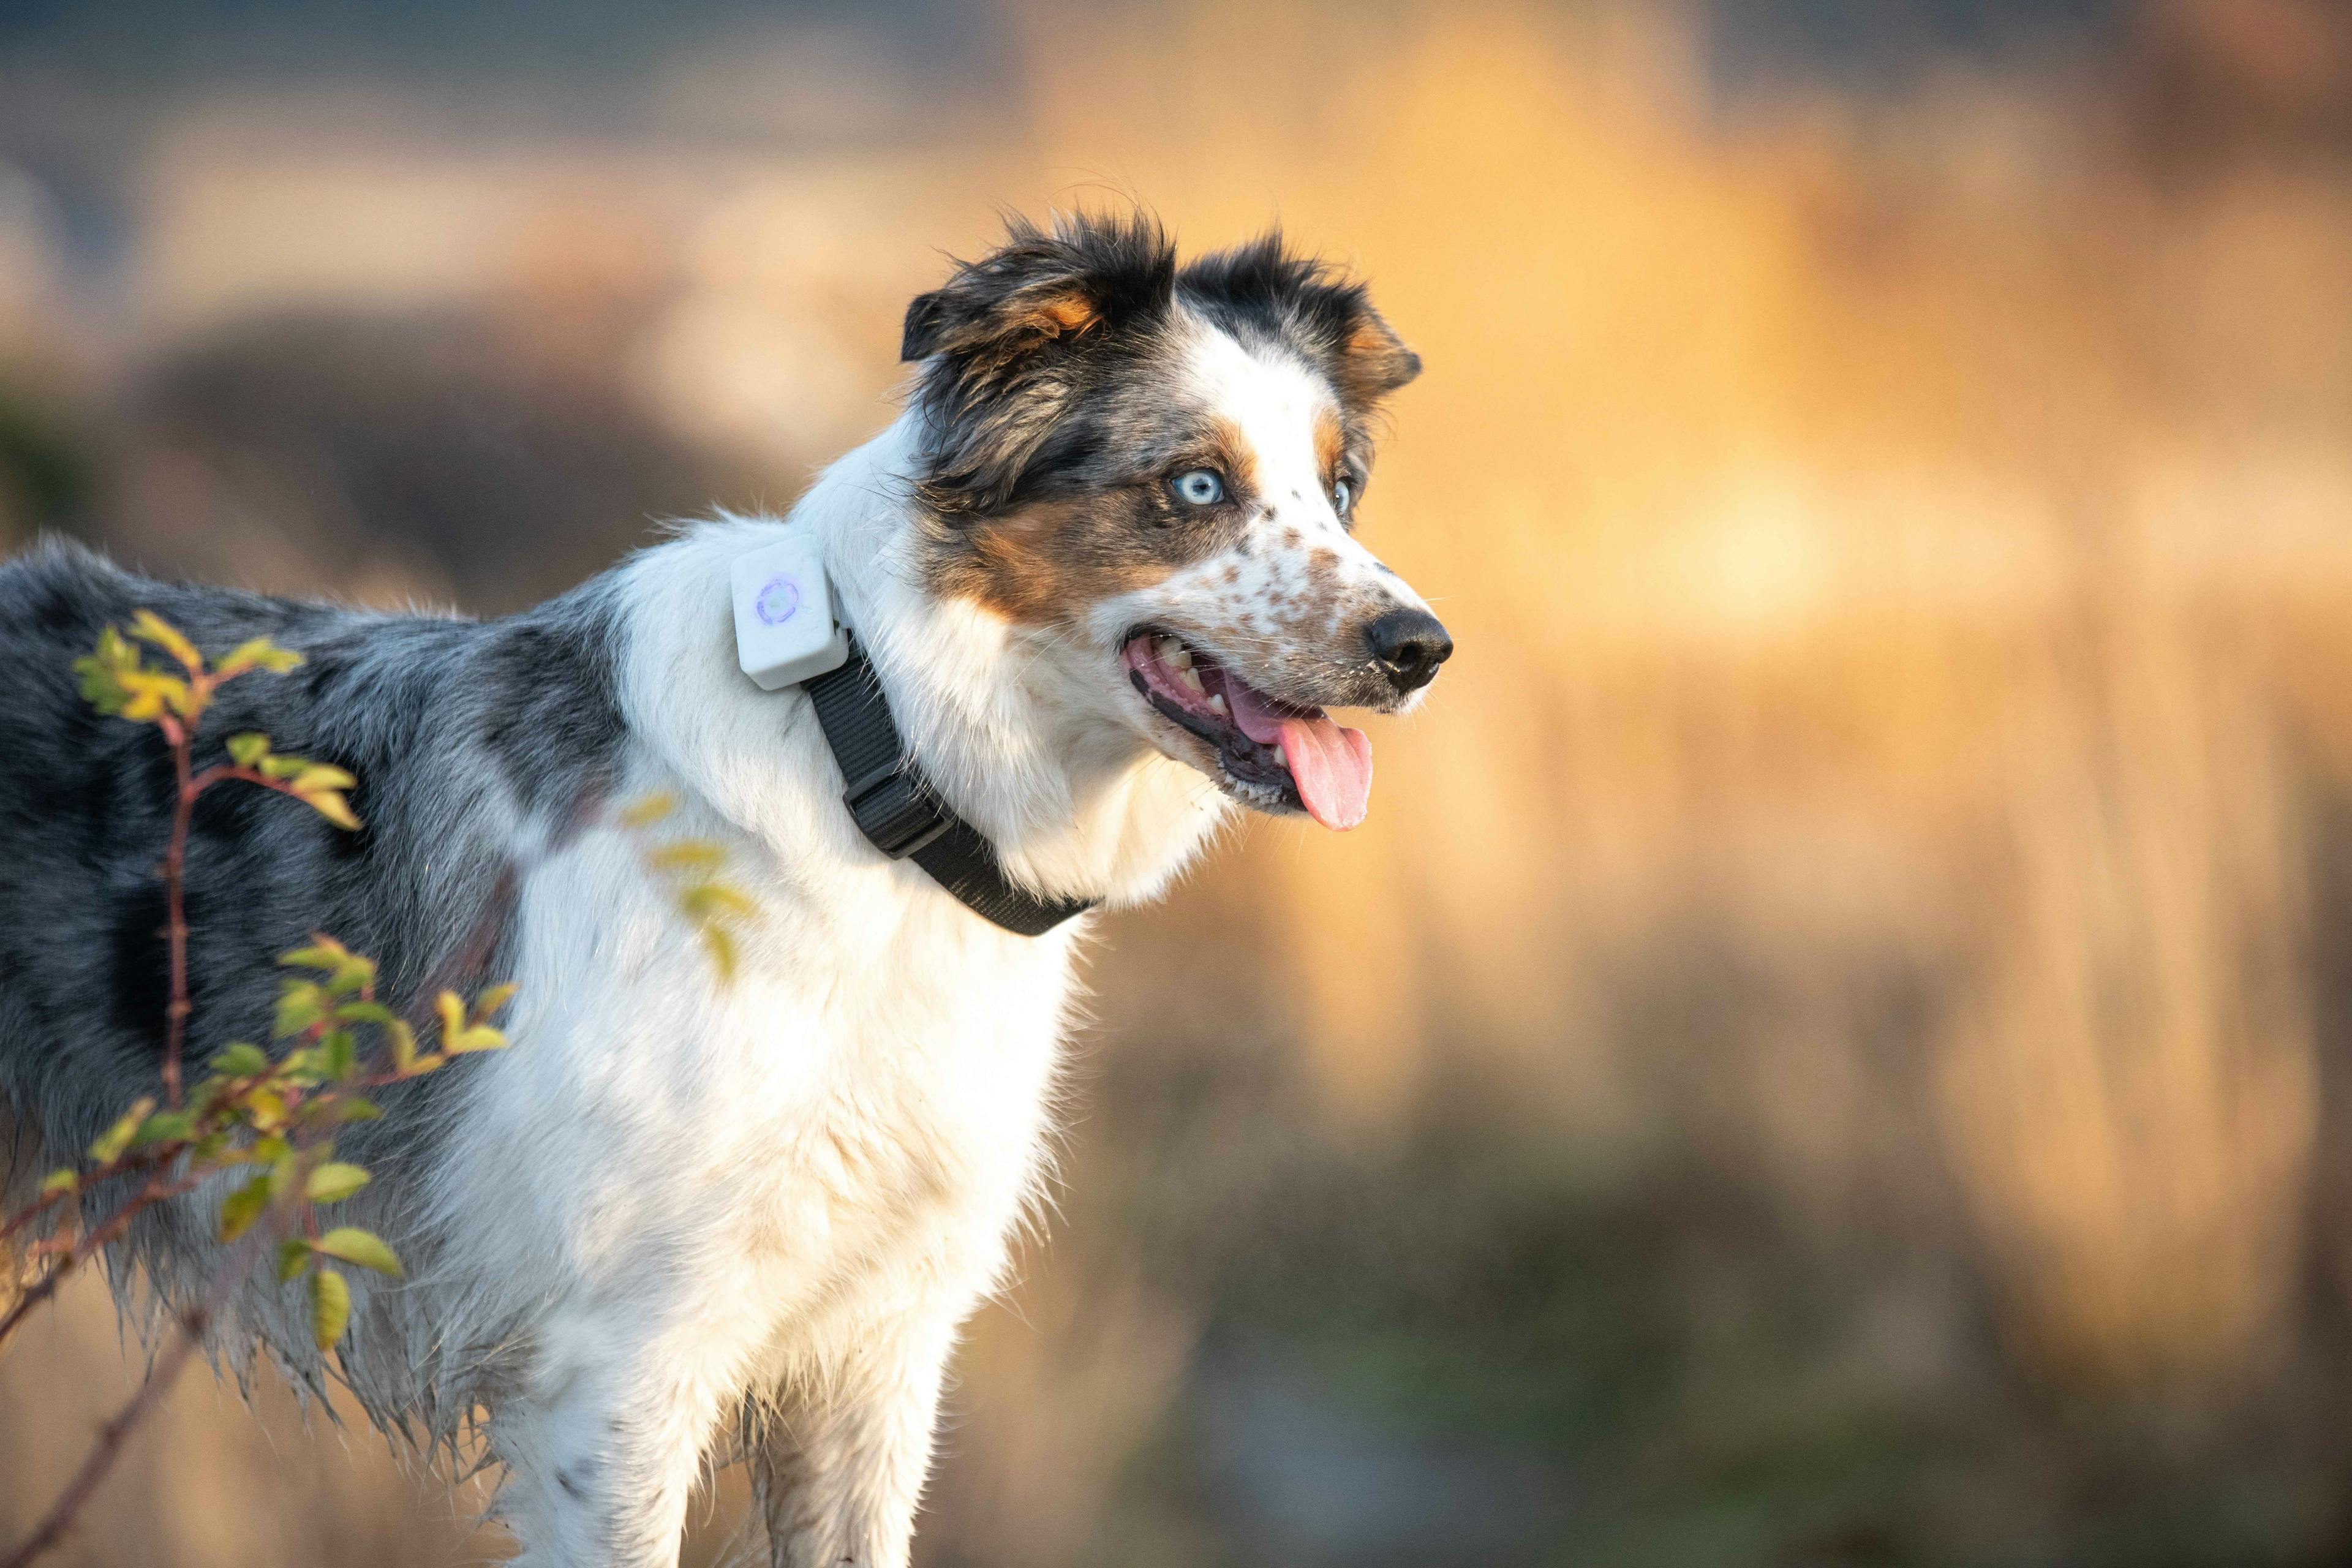 Lildog GPS tracker is also good for smaller dogs